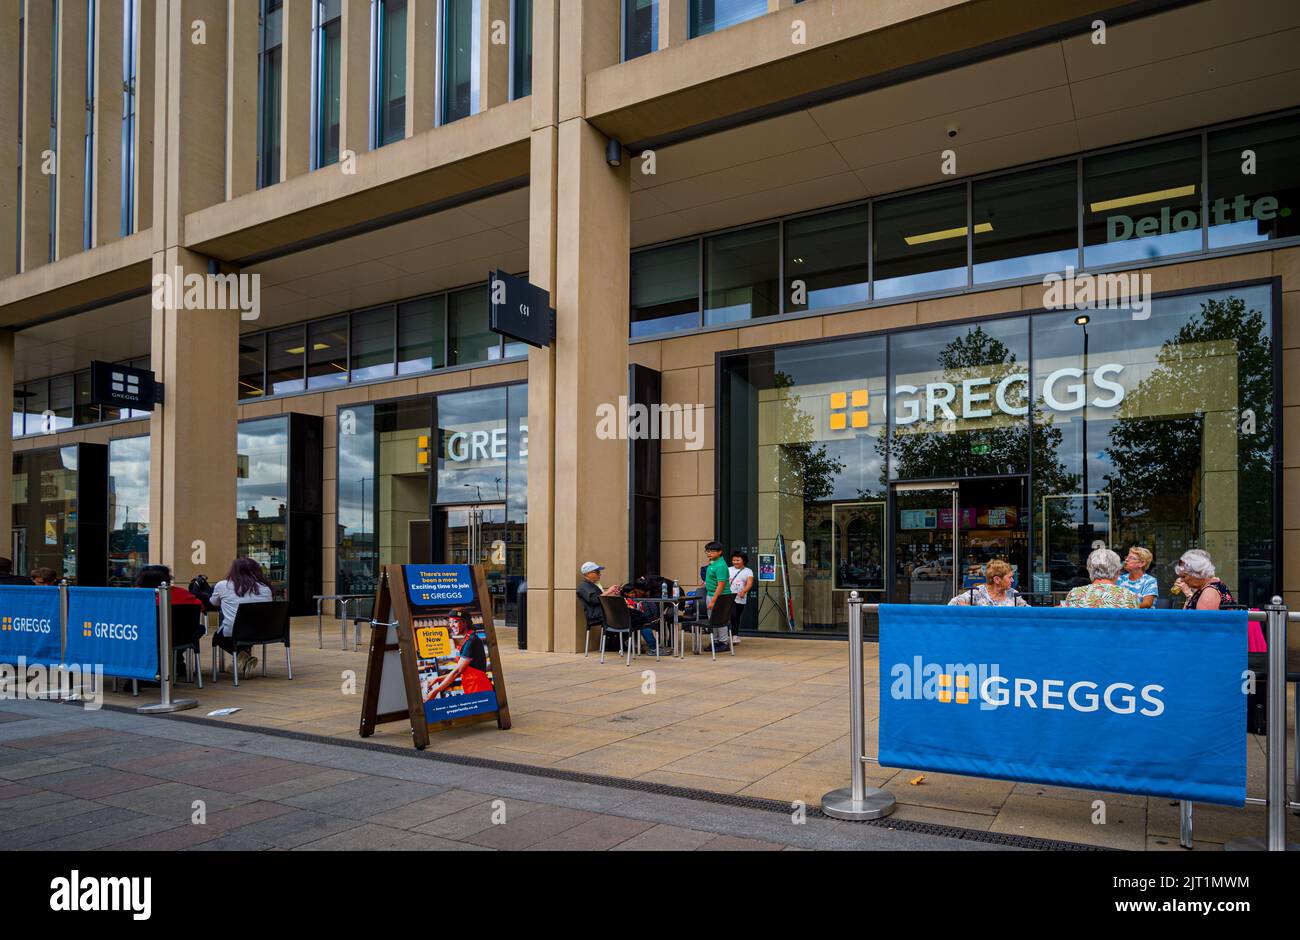 Greggs Bakery - Greggs Cafe and Food Store at Cambridge Station Square, Cambridge UK. Stock Photo